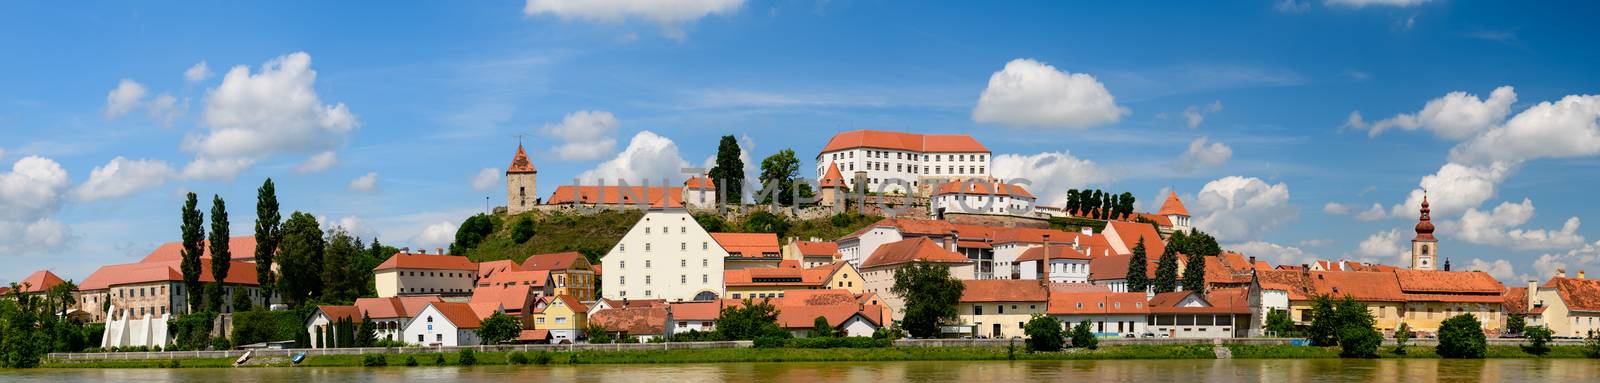 Ptuj, Slovenia, panoramic shot of oldest city in Slovenia with a castle overlooking the old town from a hill and the Drava river beneath, clouds moving across the sky time lapse